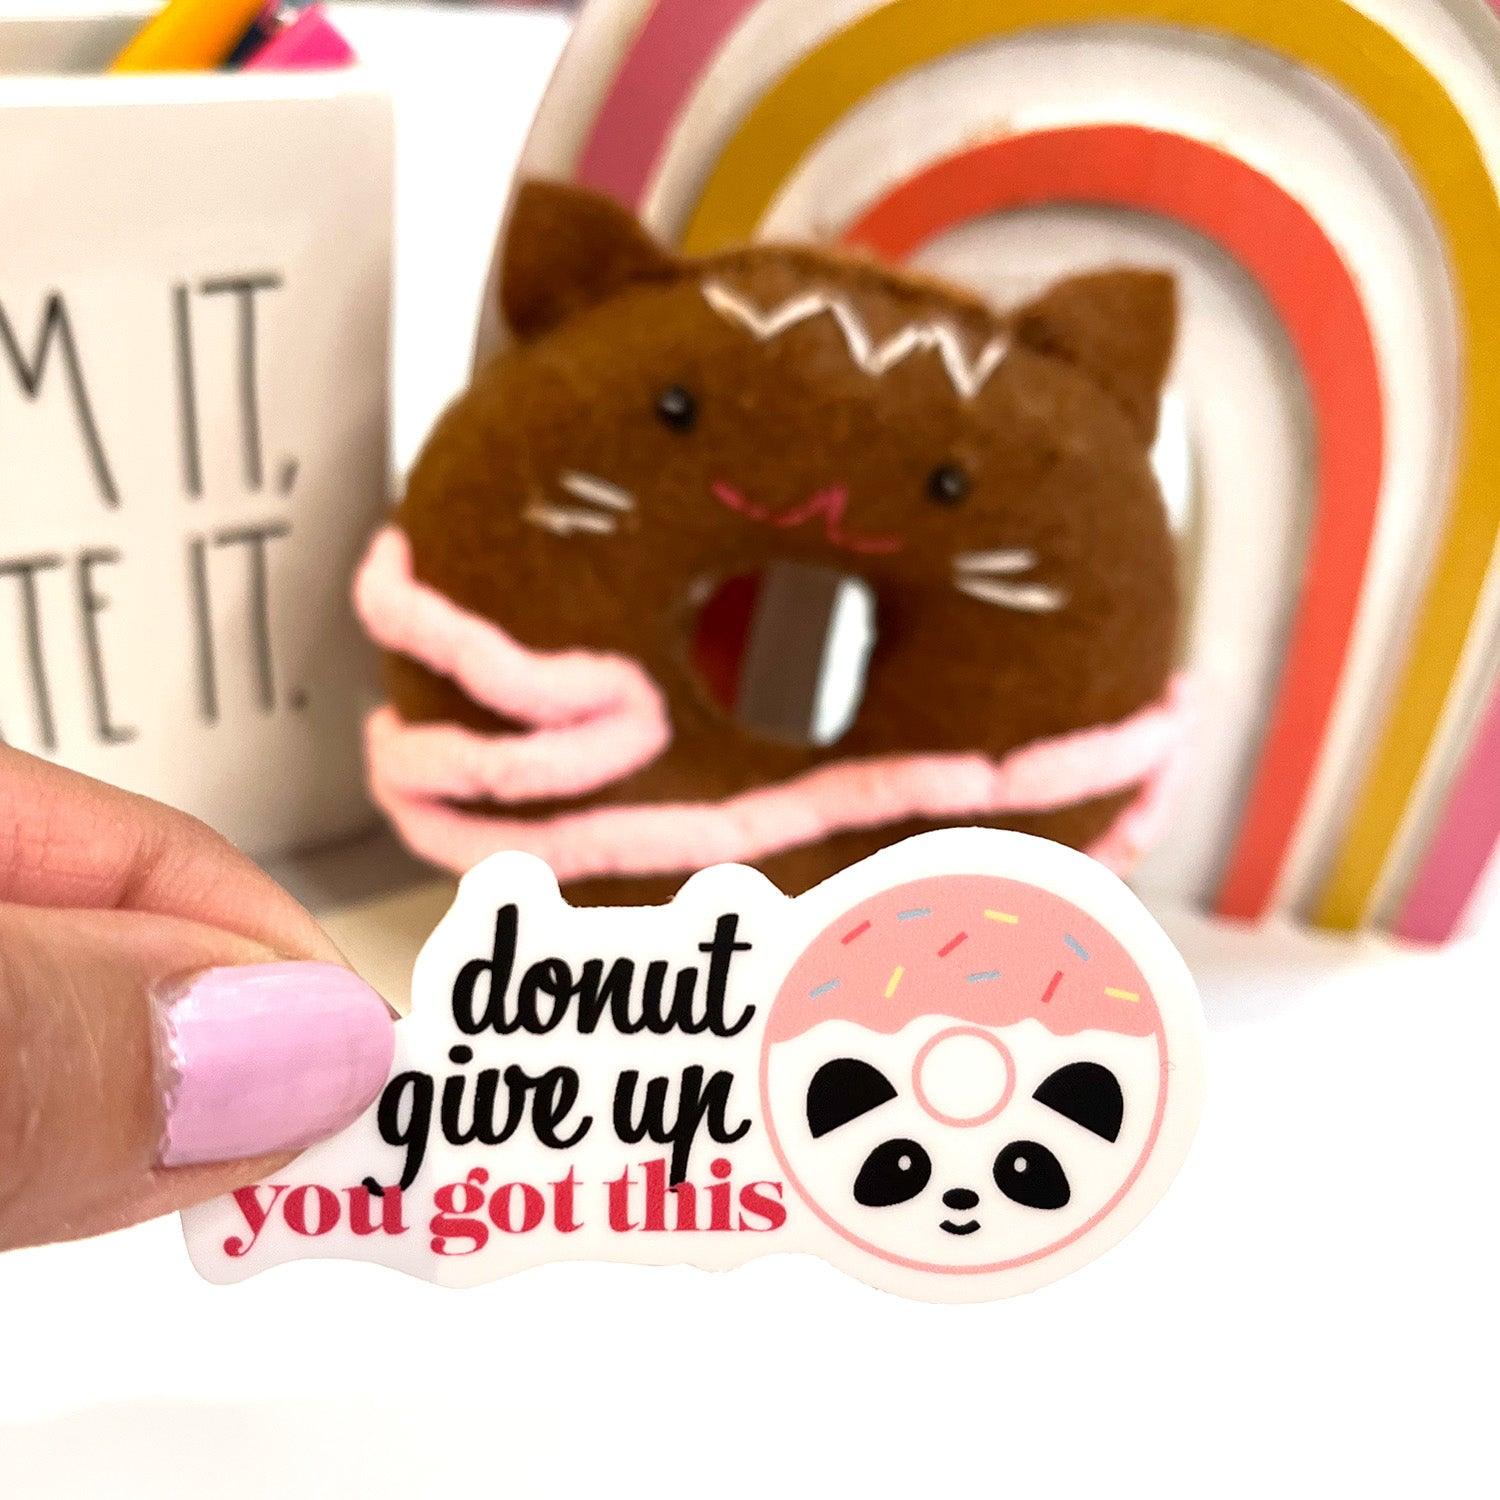 Donut give up sticker inside with rainbow background